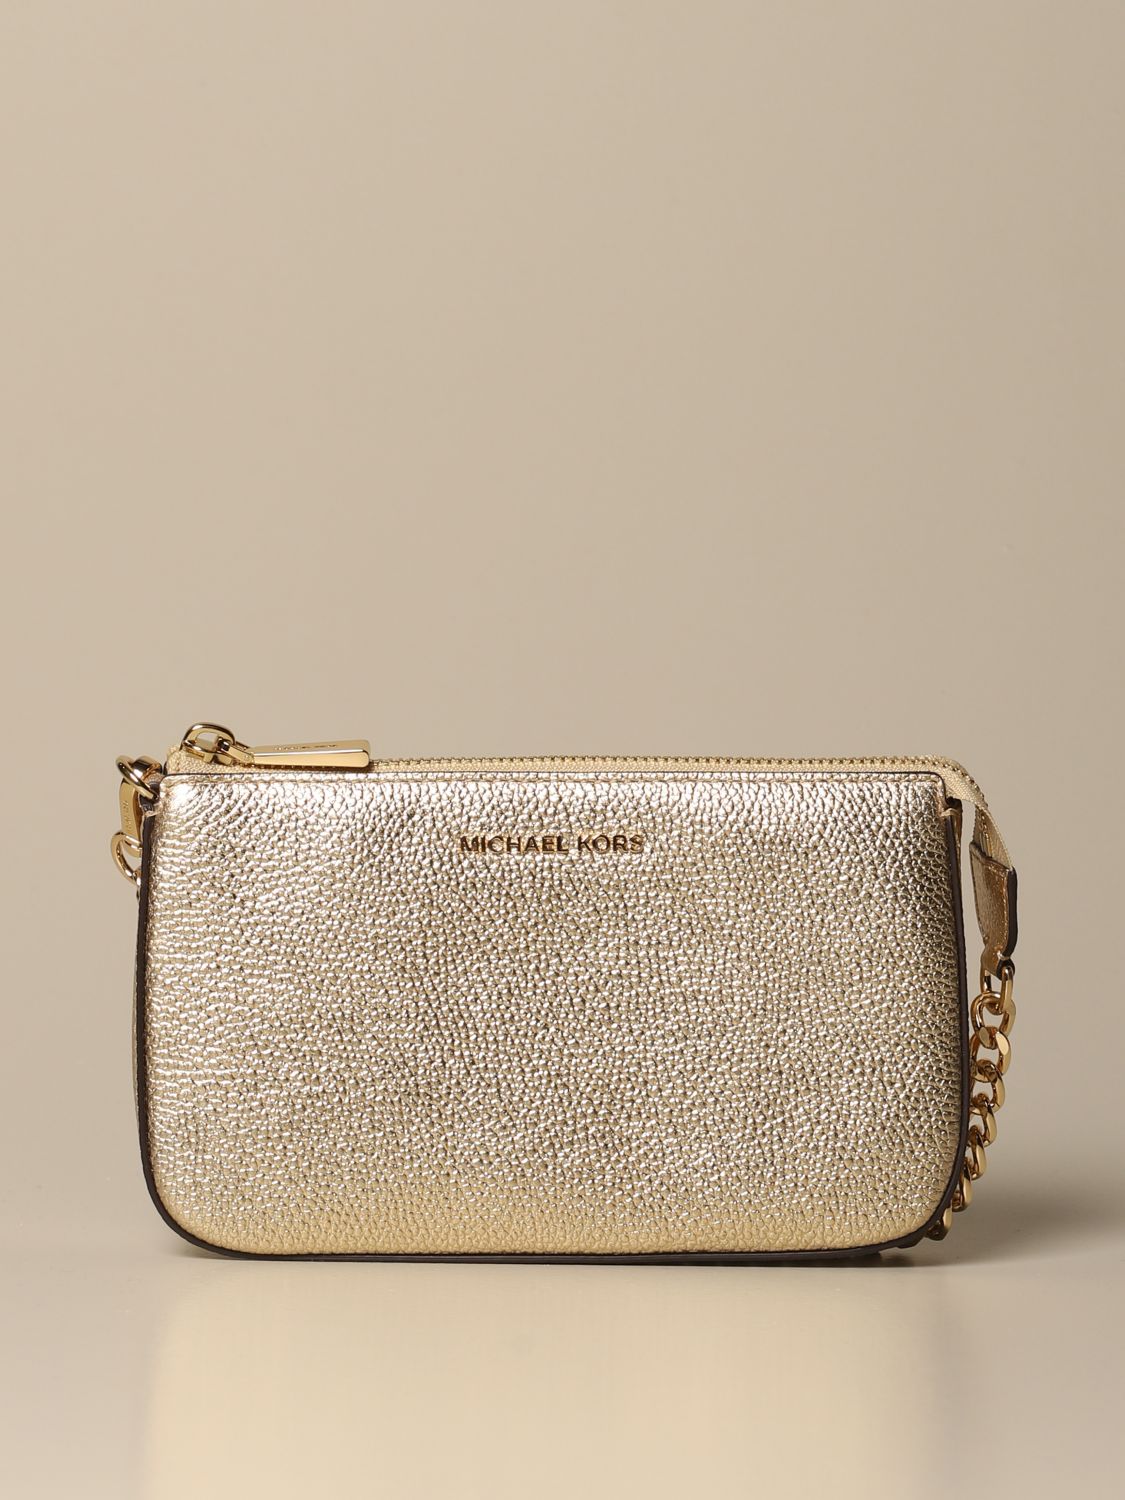 MICHAEL KORS: Michael chain clutch in laminated leather - Gold